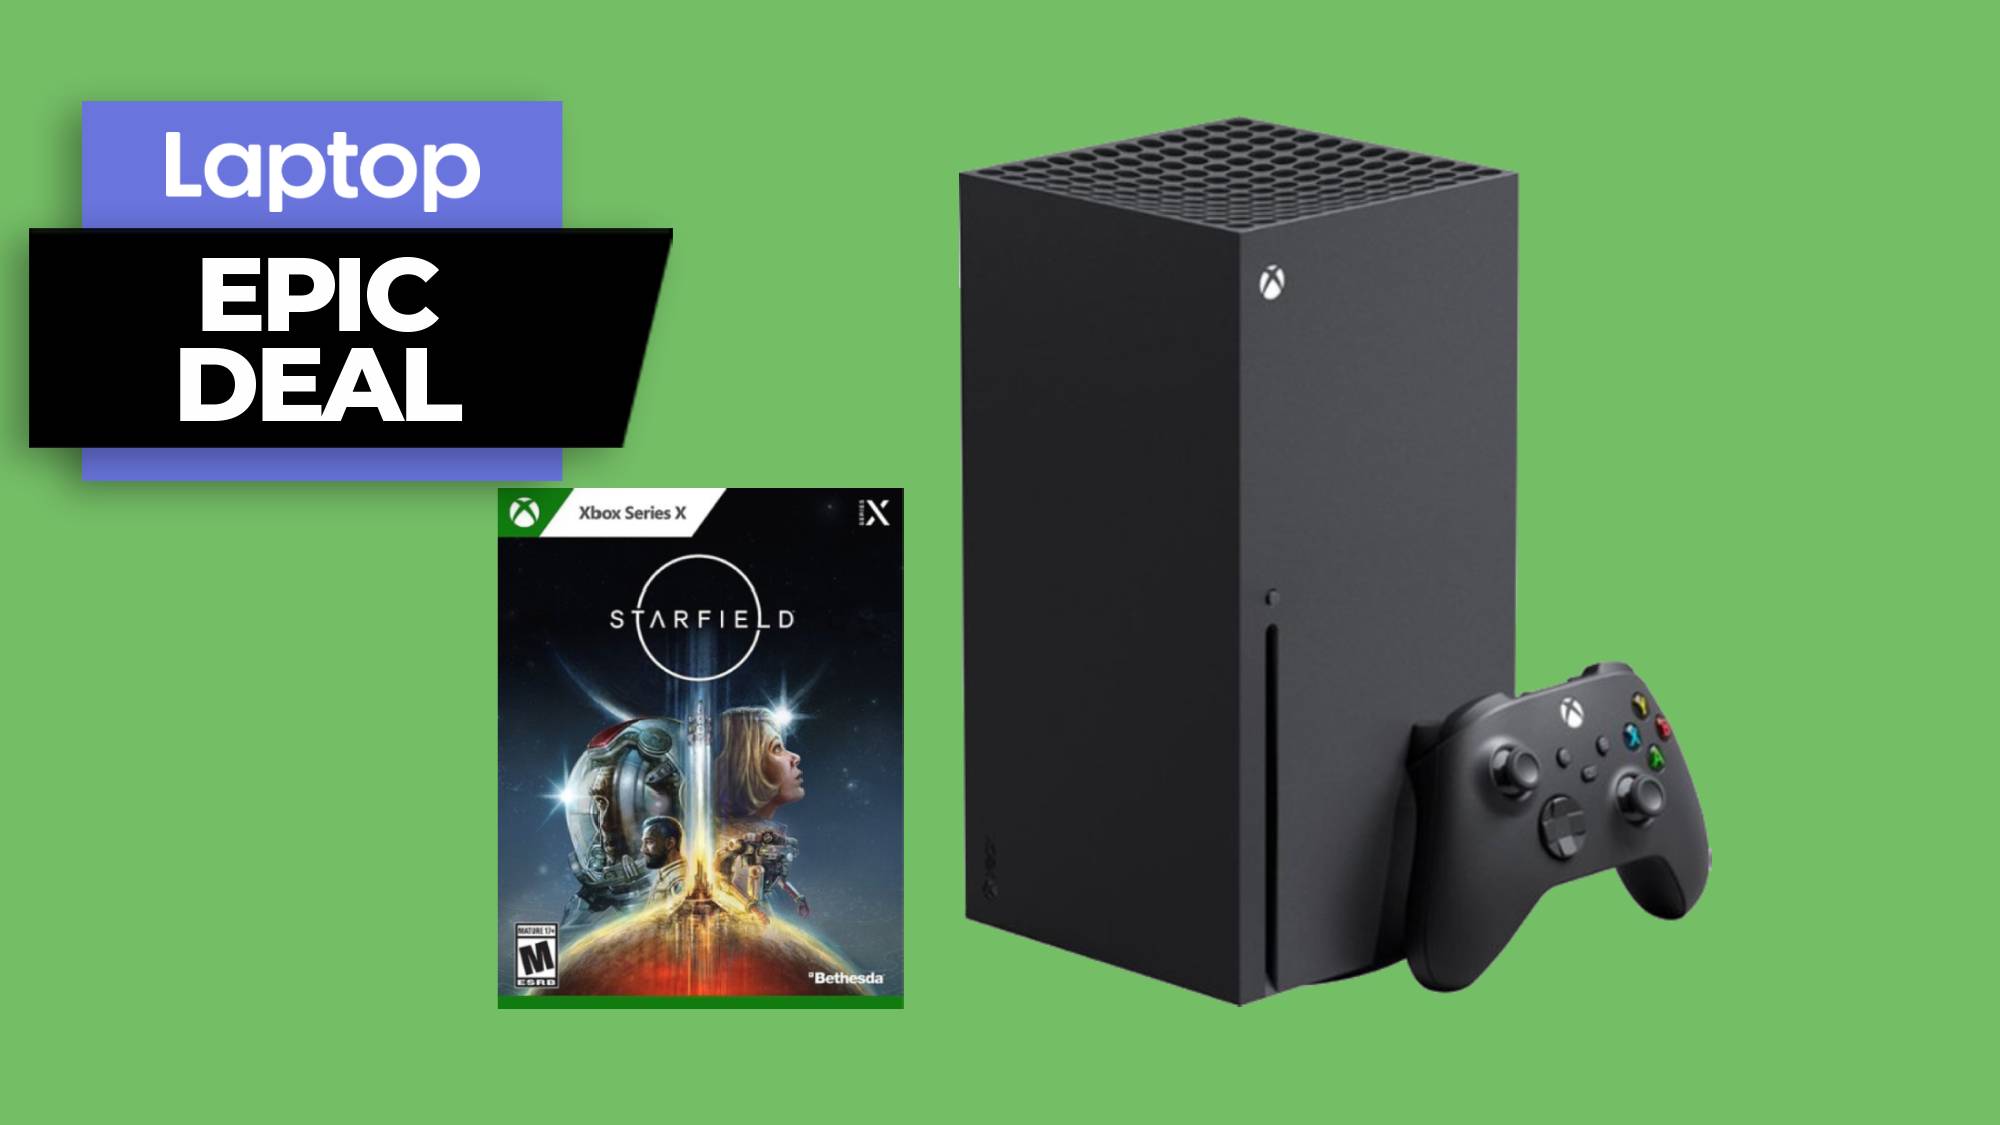 Xbox Series X gets price cut in time for Starfield